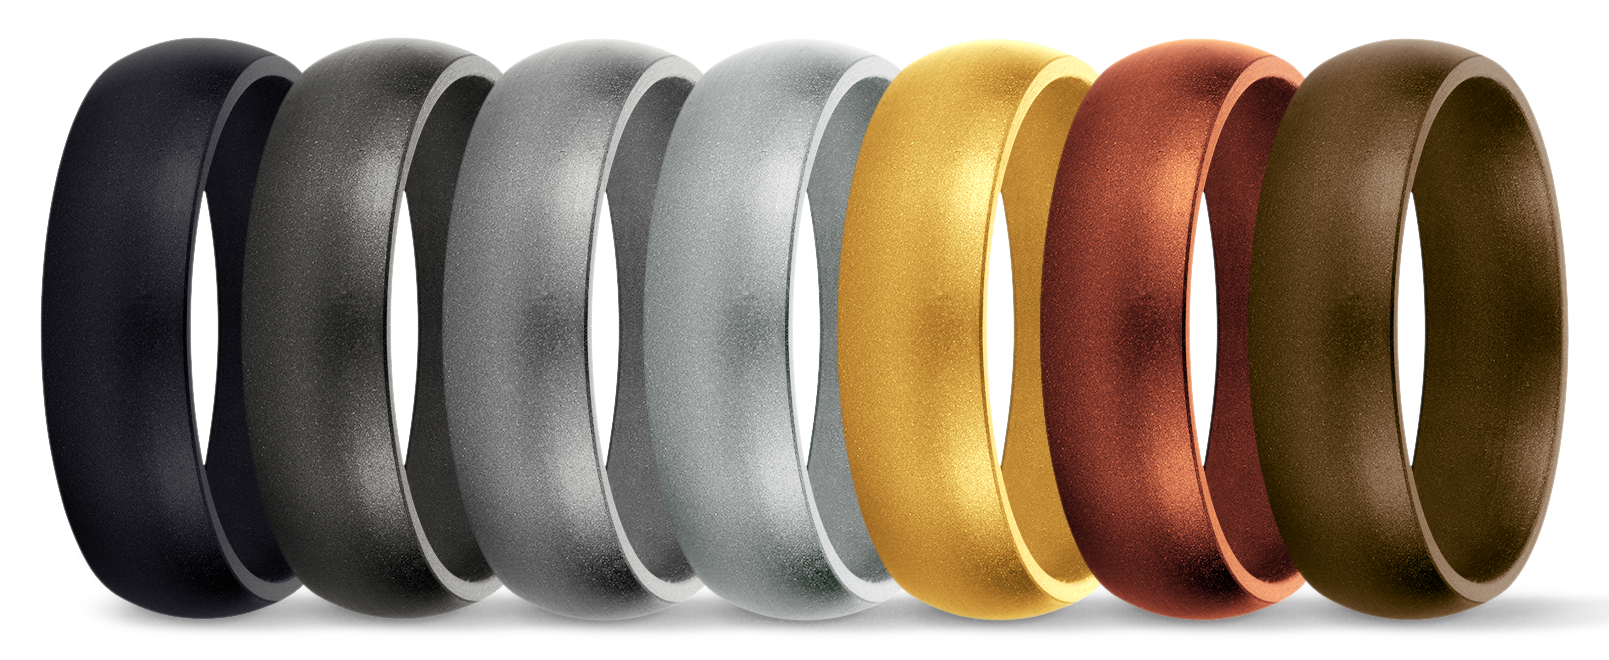 Don't Miss Your Chance to Get 25% Enso Rings During Our Labor Day Sale |  Enso Rings